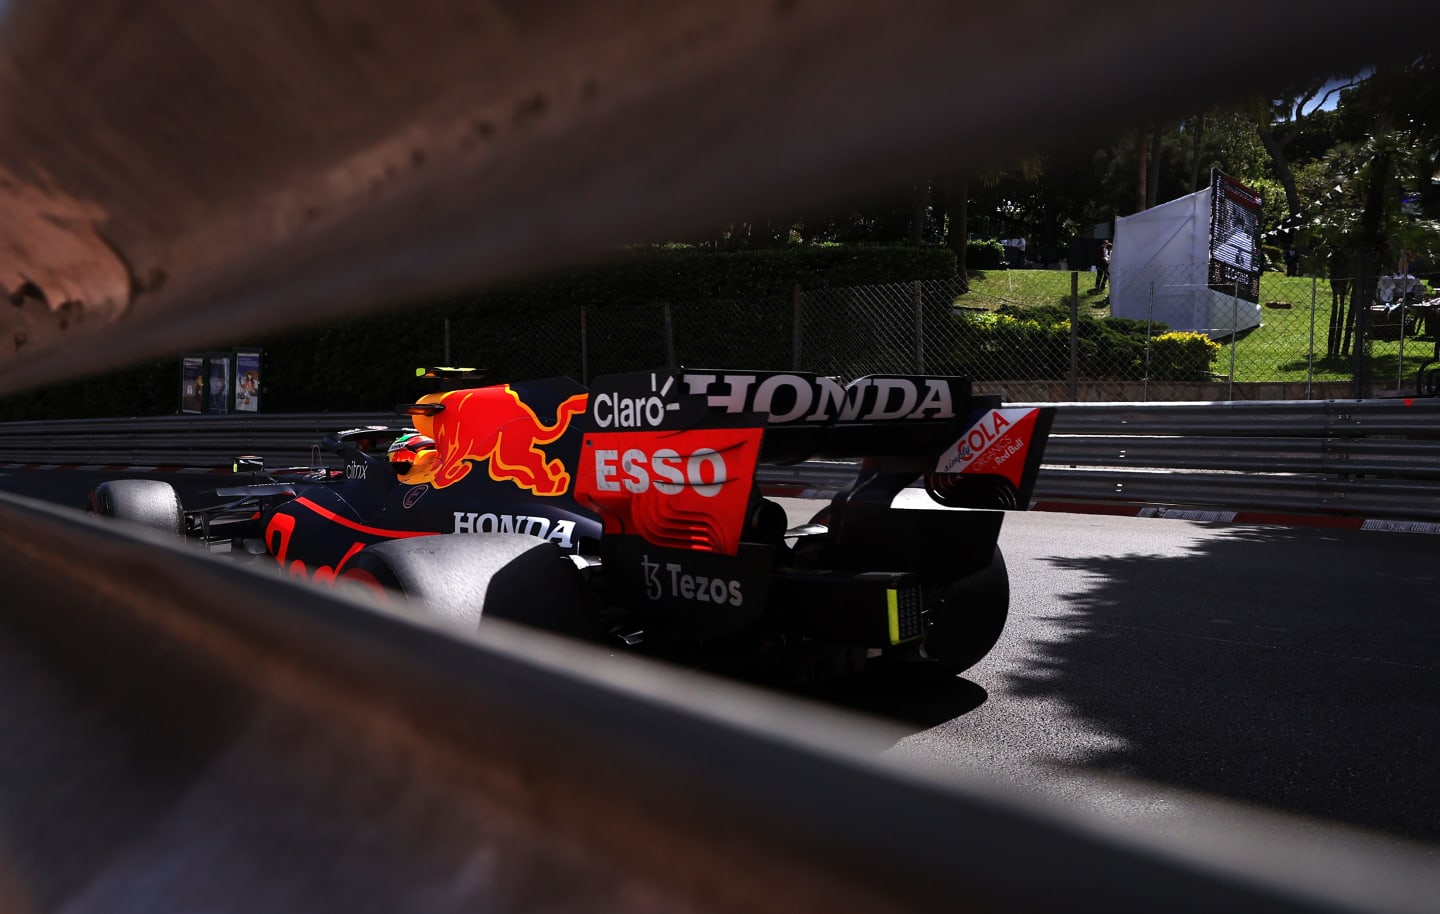 MONTE-CARLO, MONACO - MAY 23: Sergio Perez of Mexico driving the (11) Red Bull Racing RB16B Honda on track during the F1 Grand Prix of Monaco at Circuit de Monaco on May 23, 2021 in Monte-Carlo, Monaco. (Photo by Lars Baron/Getty Images)